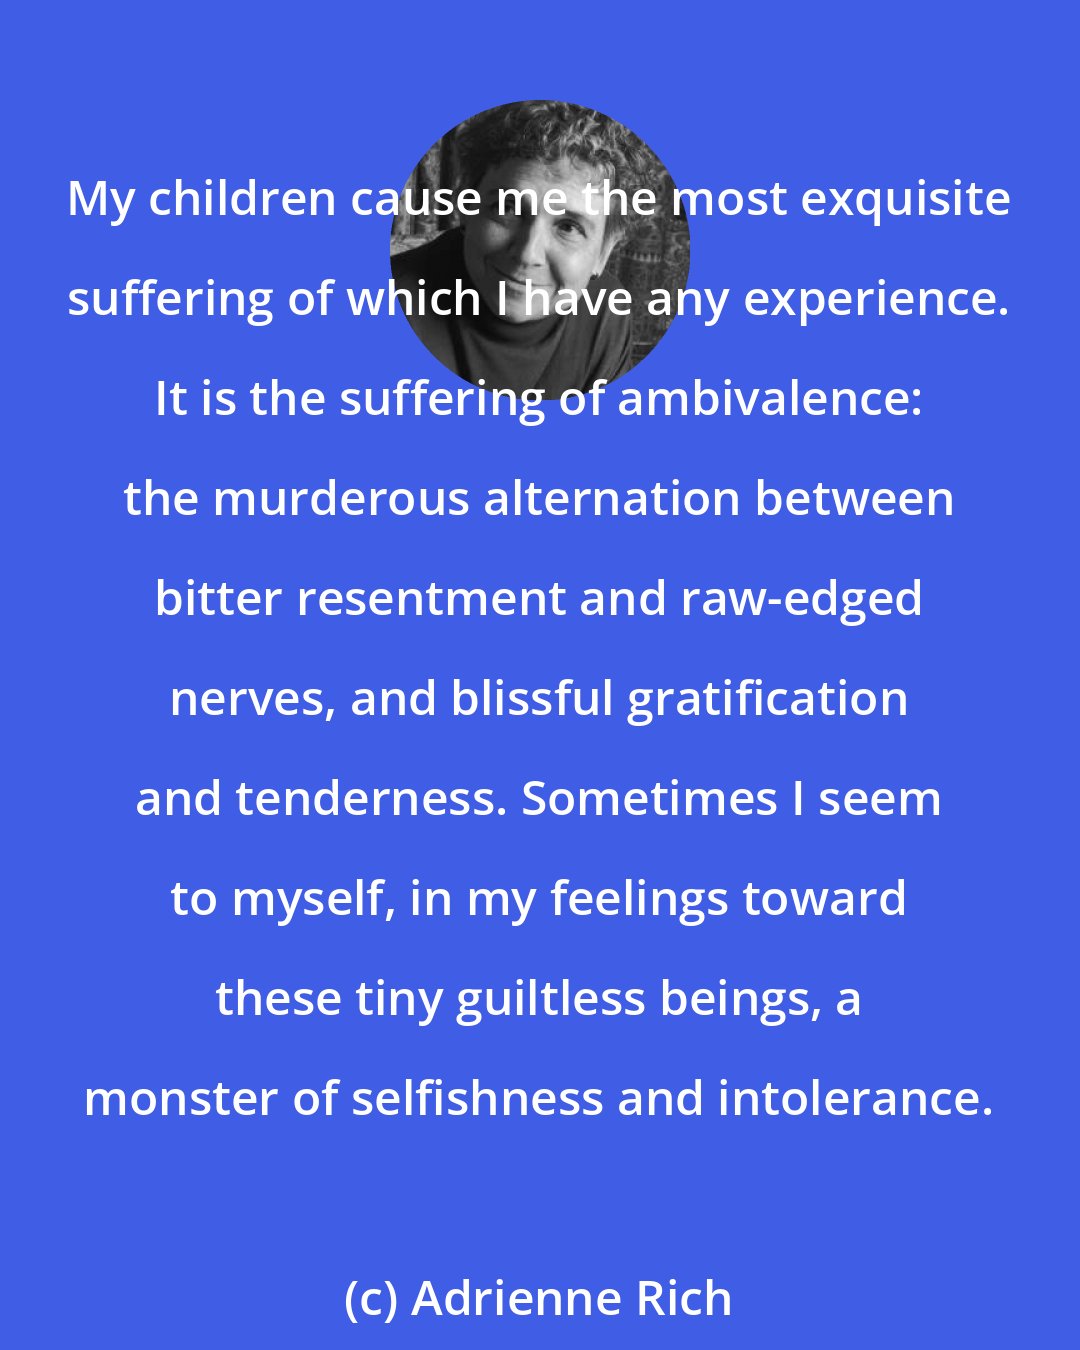 Adrienne Rich: My children cause me the most exquisite suffering of which I have any experience. It is the suffering of ambivalence: the murderous alternation between bitter resentment and raw-edged nerves, and blissful gratification and tenderness. Sometimes I seem to myself, in my feelings toward these tiny guiltless beings, a monster of selfishness and intolerance.